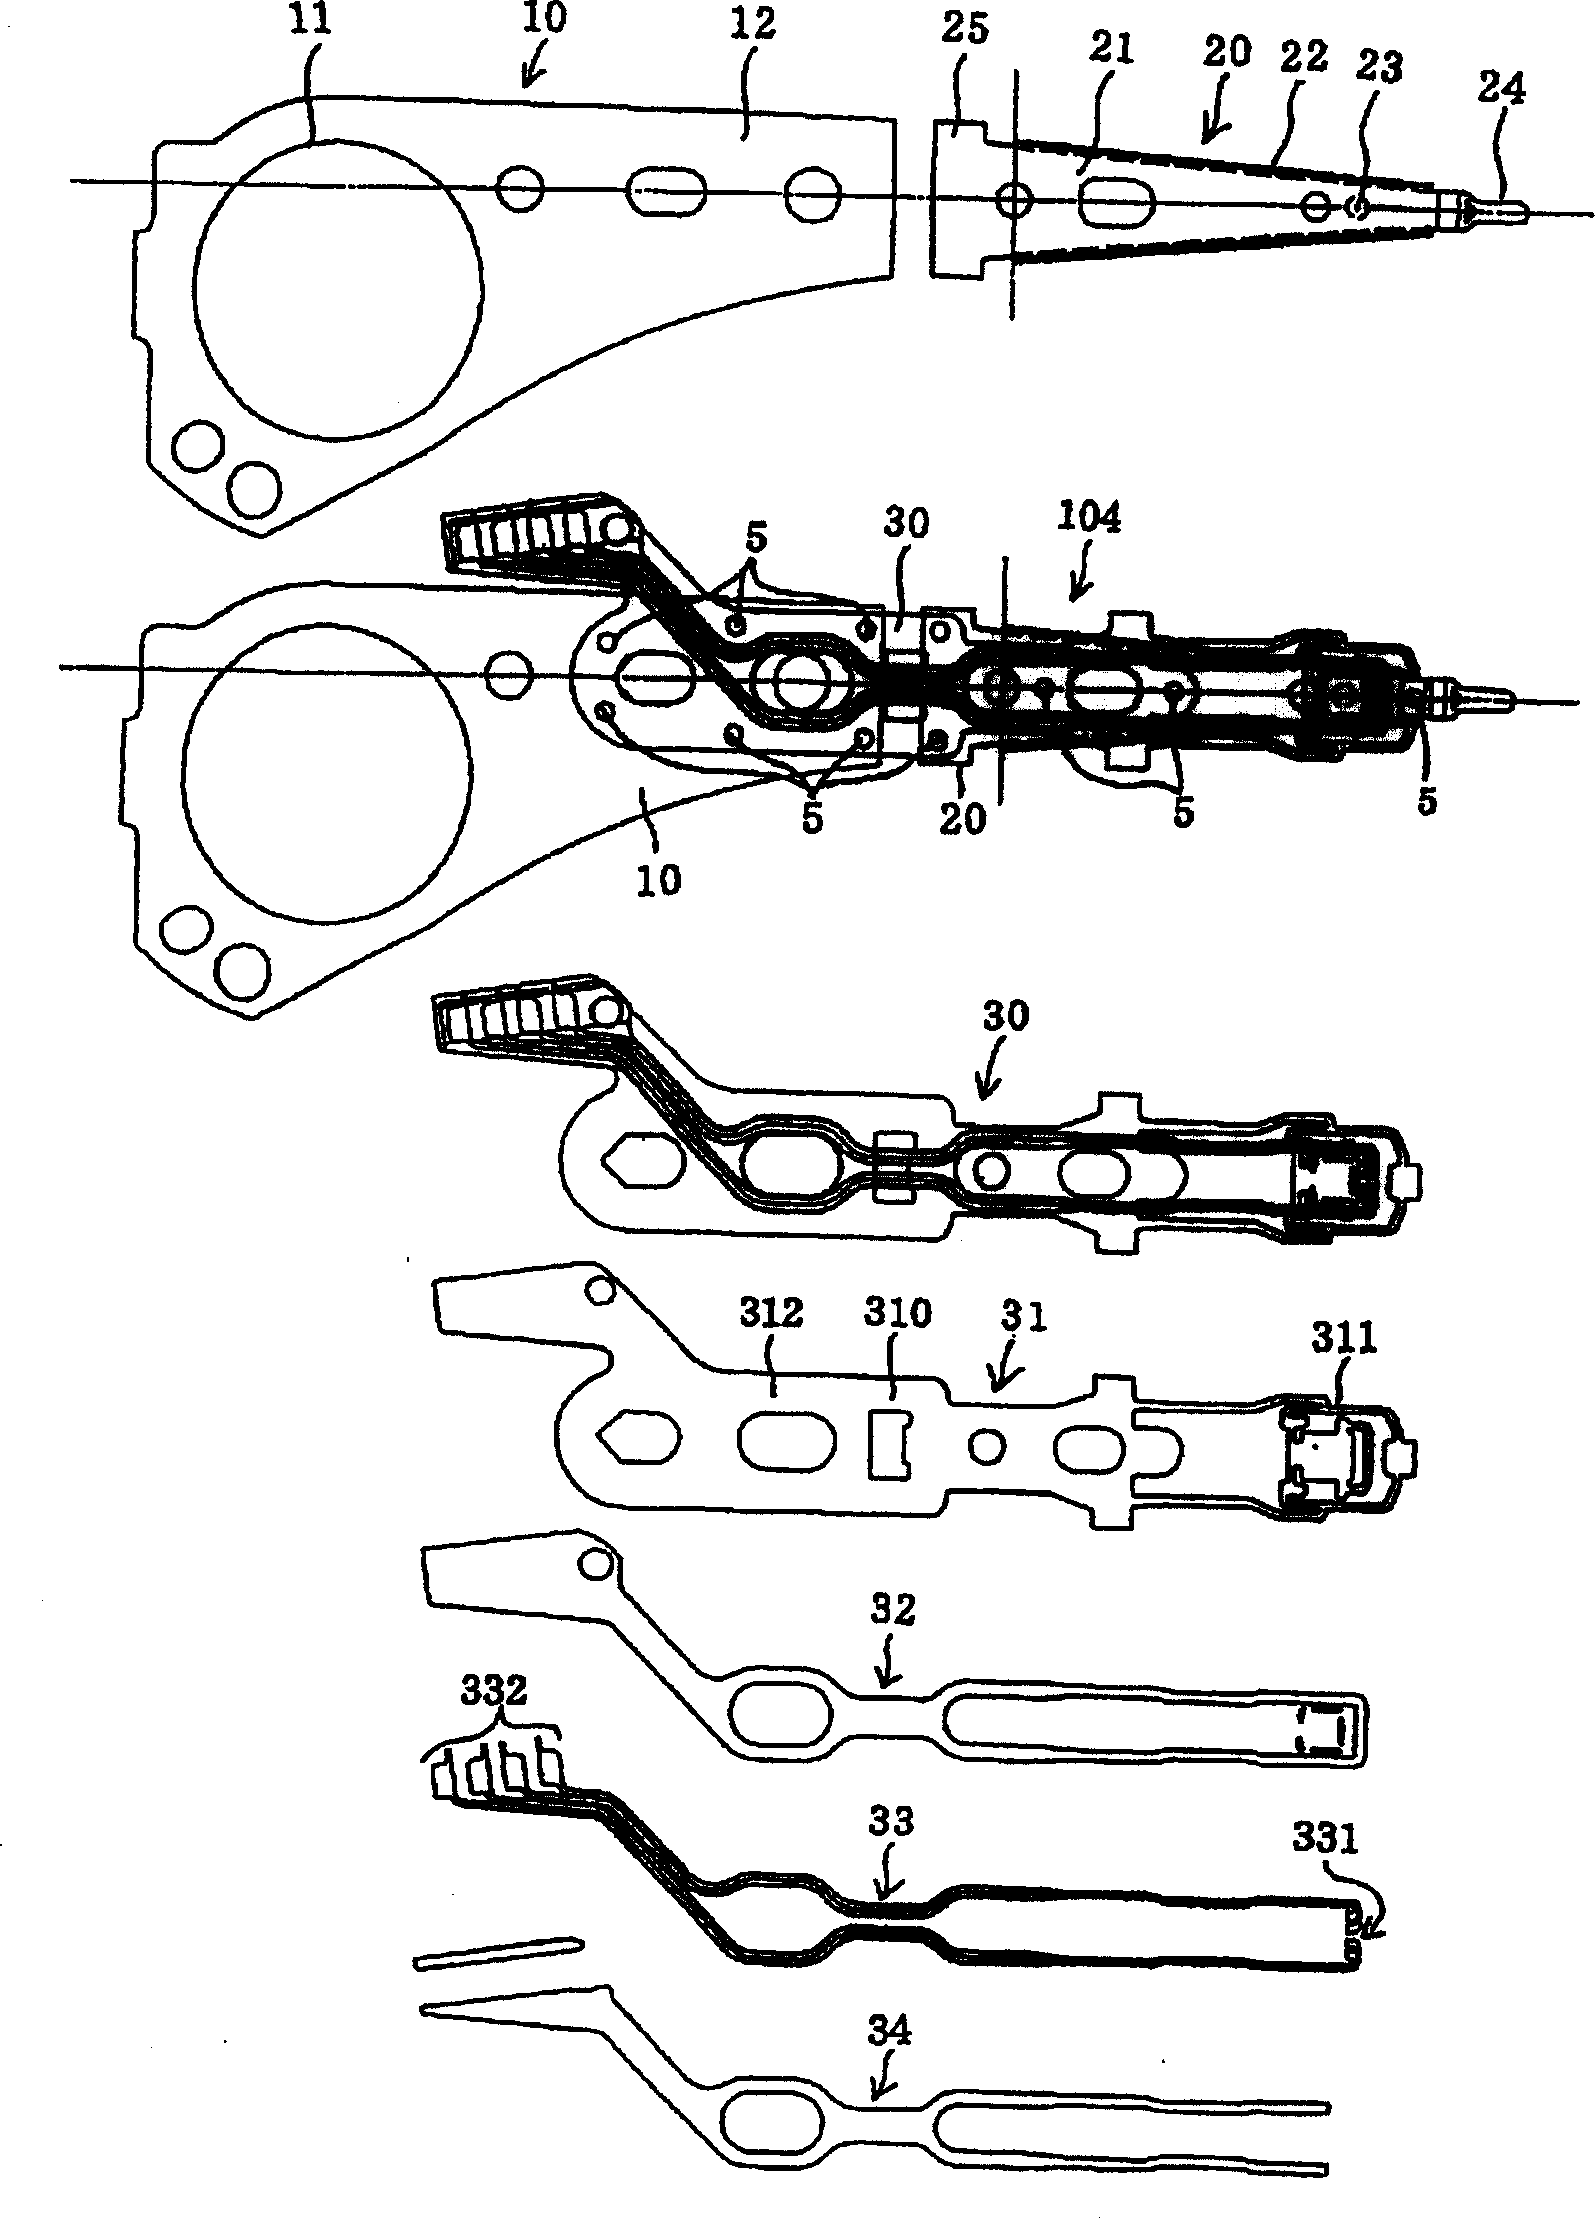 Suspension assembly and magnetic disk drive